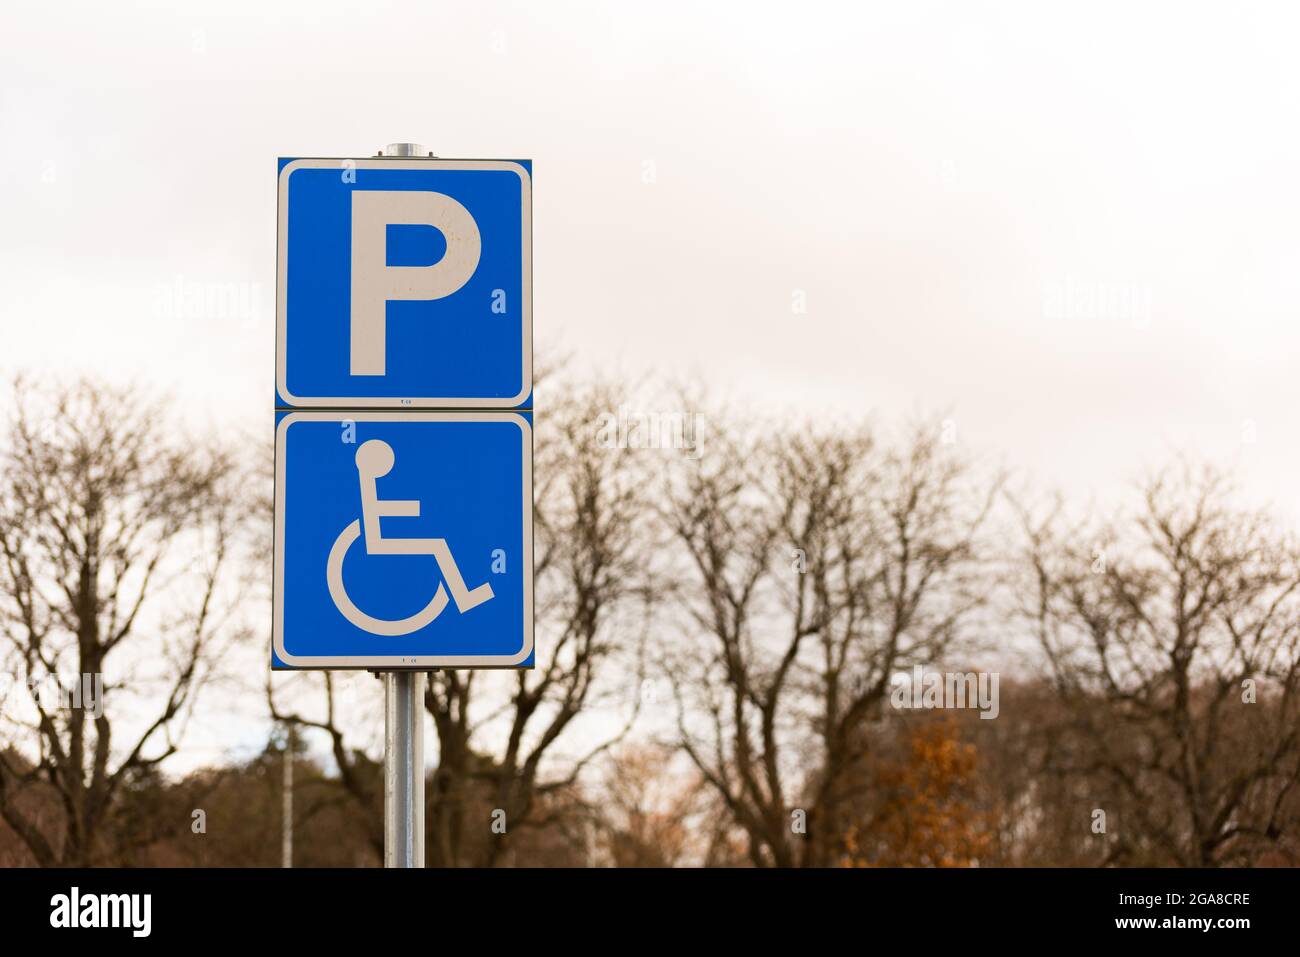 Handicap parking sign by a parking lot. Stock Photo